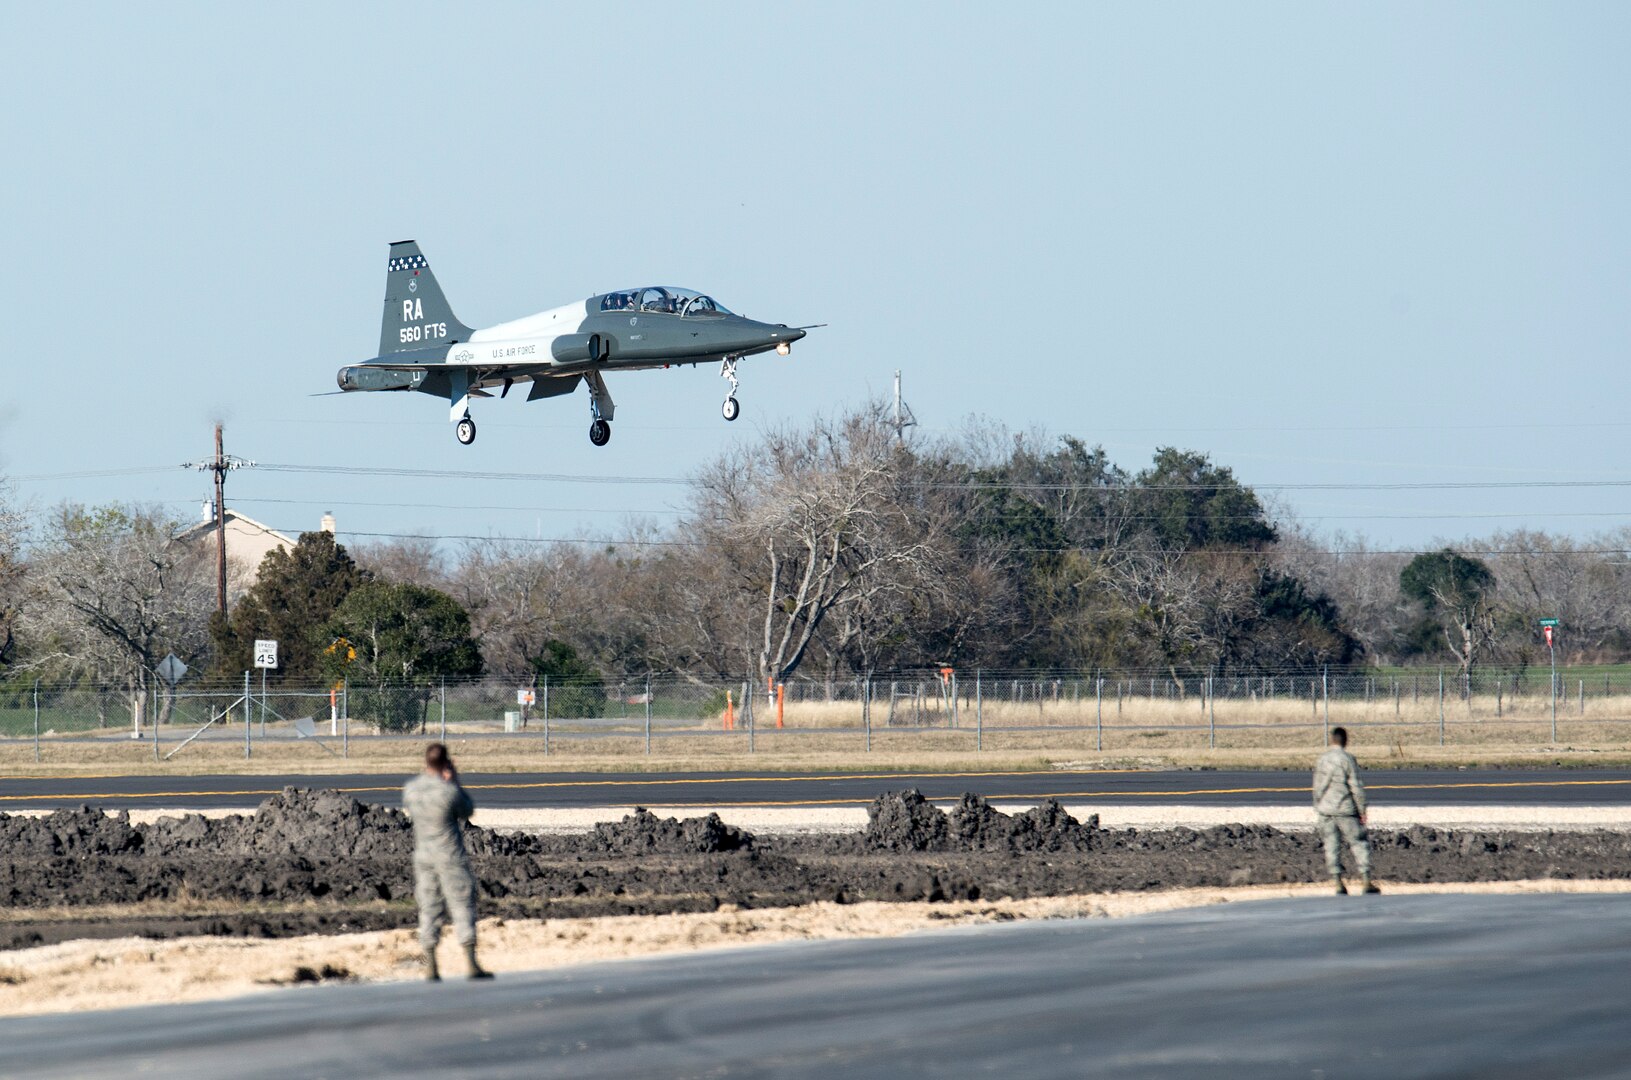 The first T-38C Talon lands at the Joint Base San Antonio-Randolph Seguin Auxiliary Airfield during a ribbon cutting event signifying the reopening of the JBSA-Randolph Seguin Auxiliary Airfield Jan. 20.  Upon completion of a three-year construction project, the airfield is now ready for flying by members of the 560th Flying Training Squadron.  The airfield is crucial for “touch and go” training that qualifies fighter and bomber pilots as instructor pilots in the T-38C Talon.  The reconstructed runway increases flight safety by distributing training around the San Antonio area, which means fewer aircraft and less congestion around Joint Base San Antonio-Randolph. (U.S. Air Force photo by Johnny Saldivar)